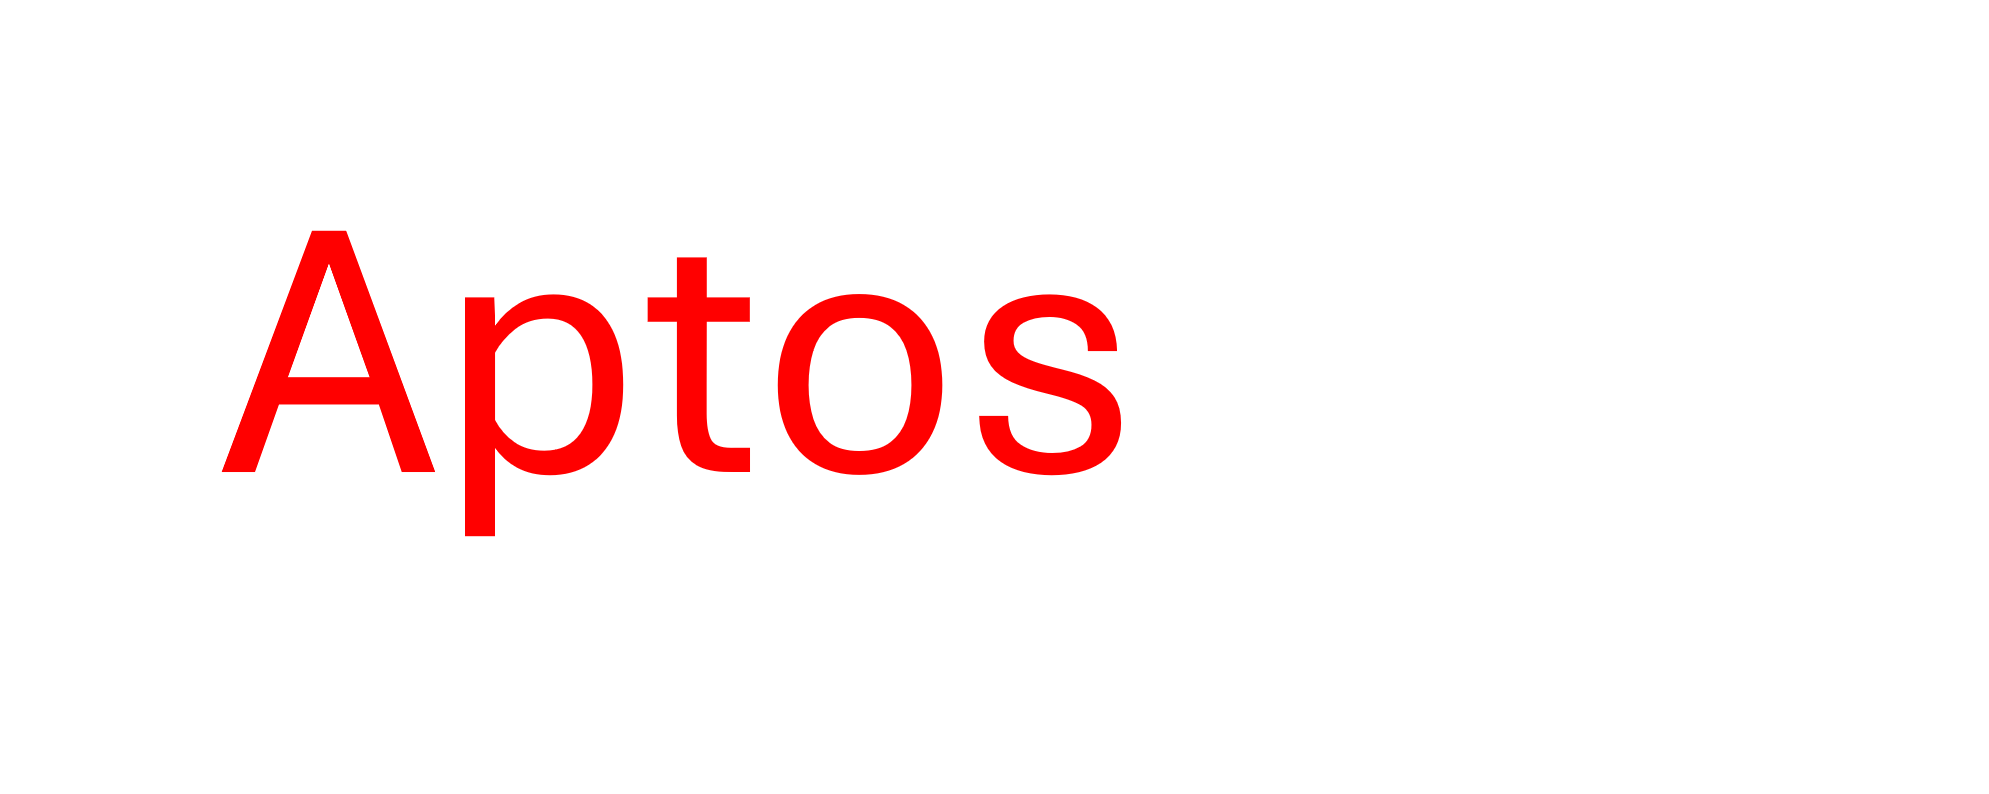 The new Aptos font as new default Microsoft Office font